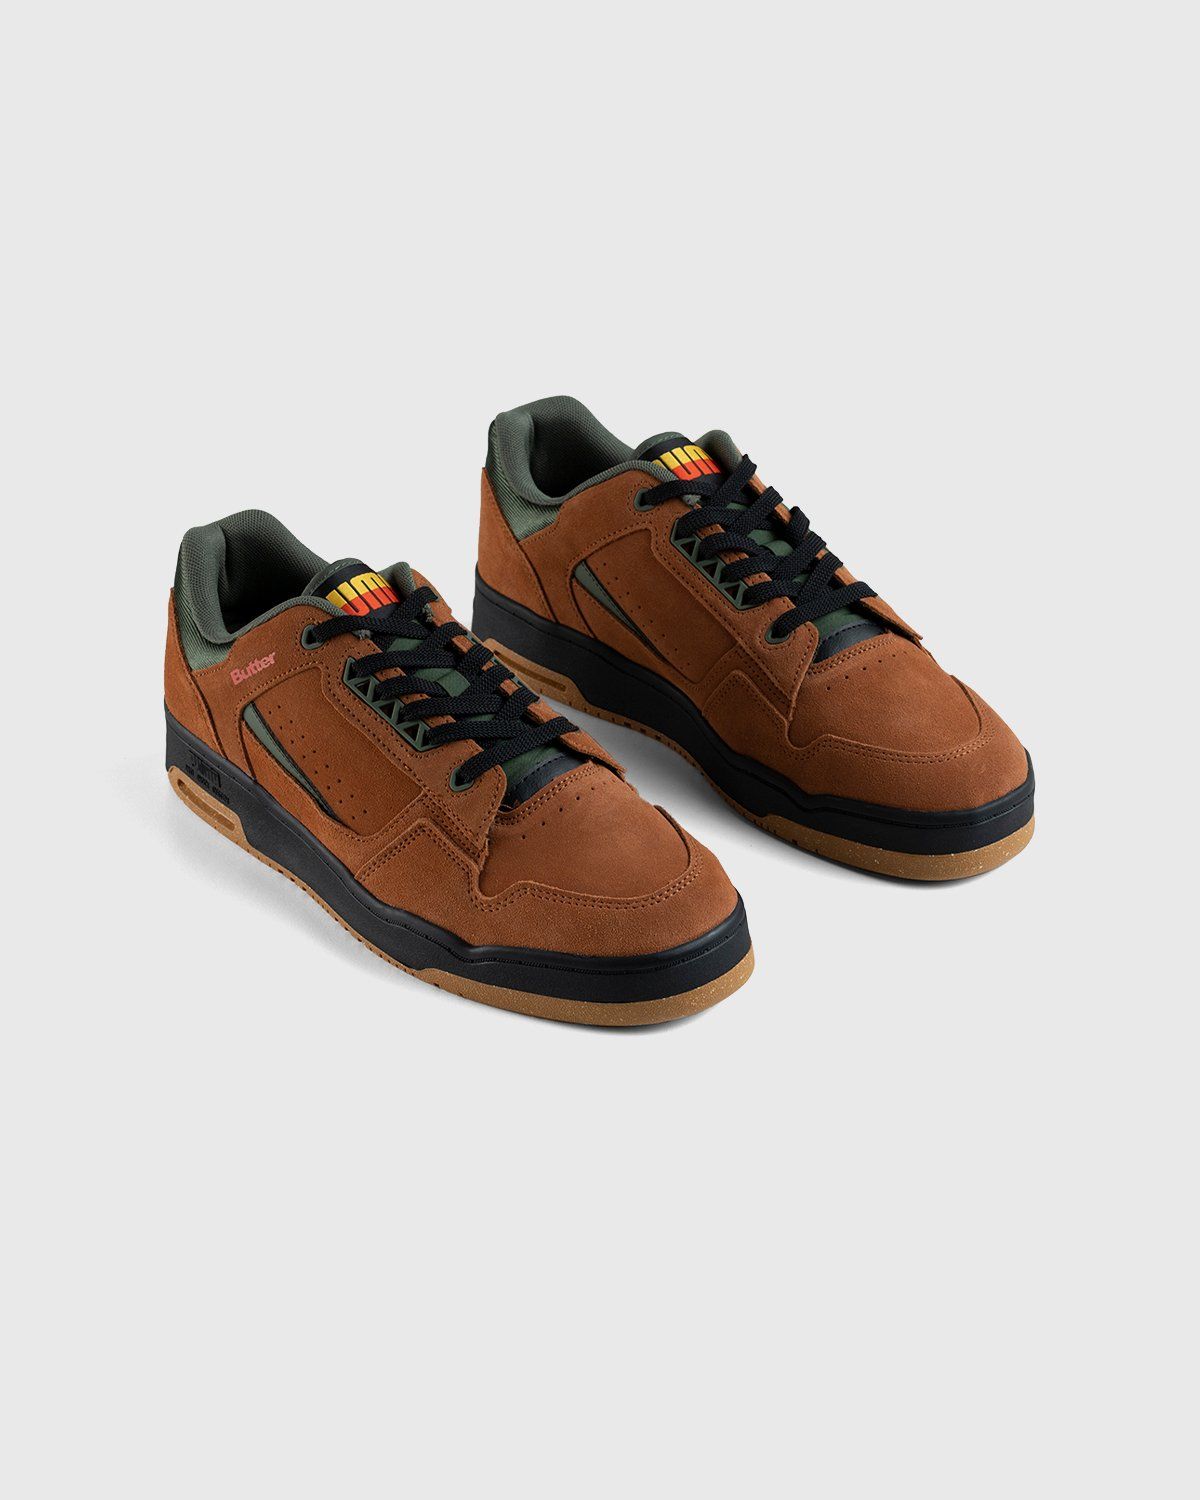 Puma x Butter Goods – Suede Slipstream Lo Mocha Bisque/Puma Black/Thyme - Low Top Sneakers - White - Image 3